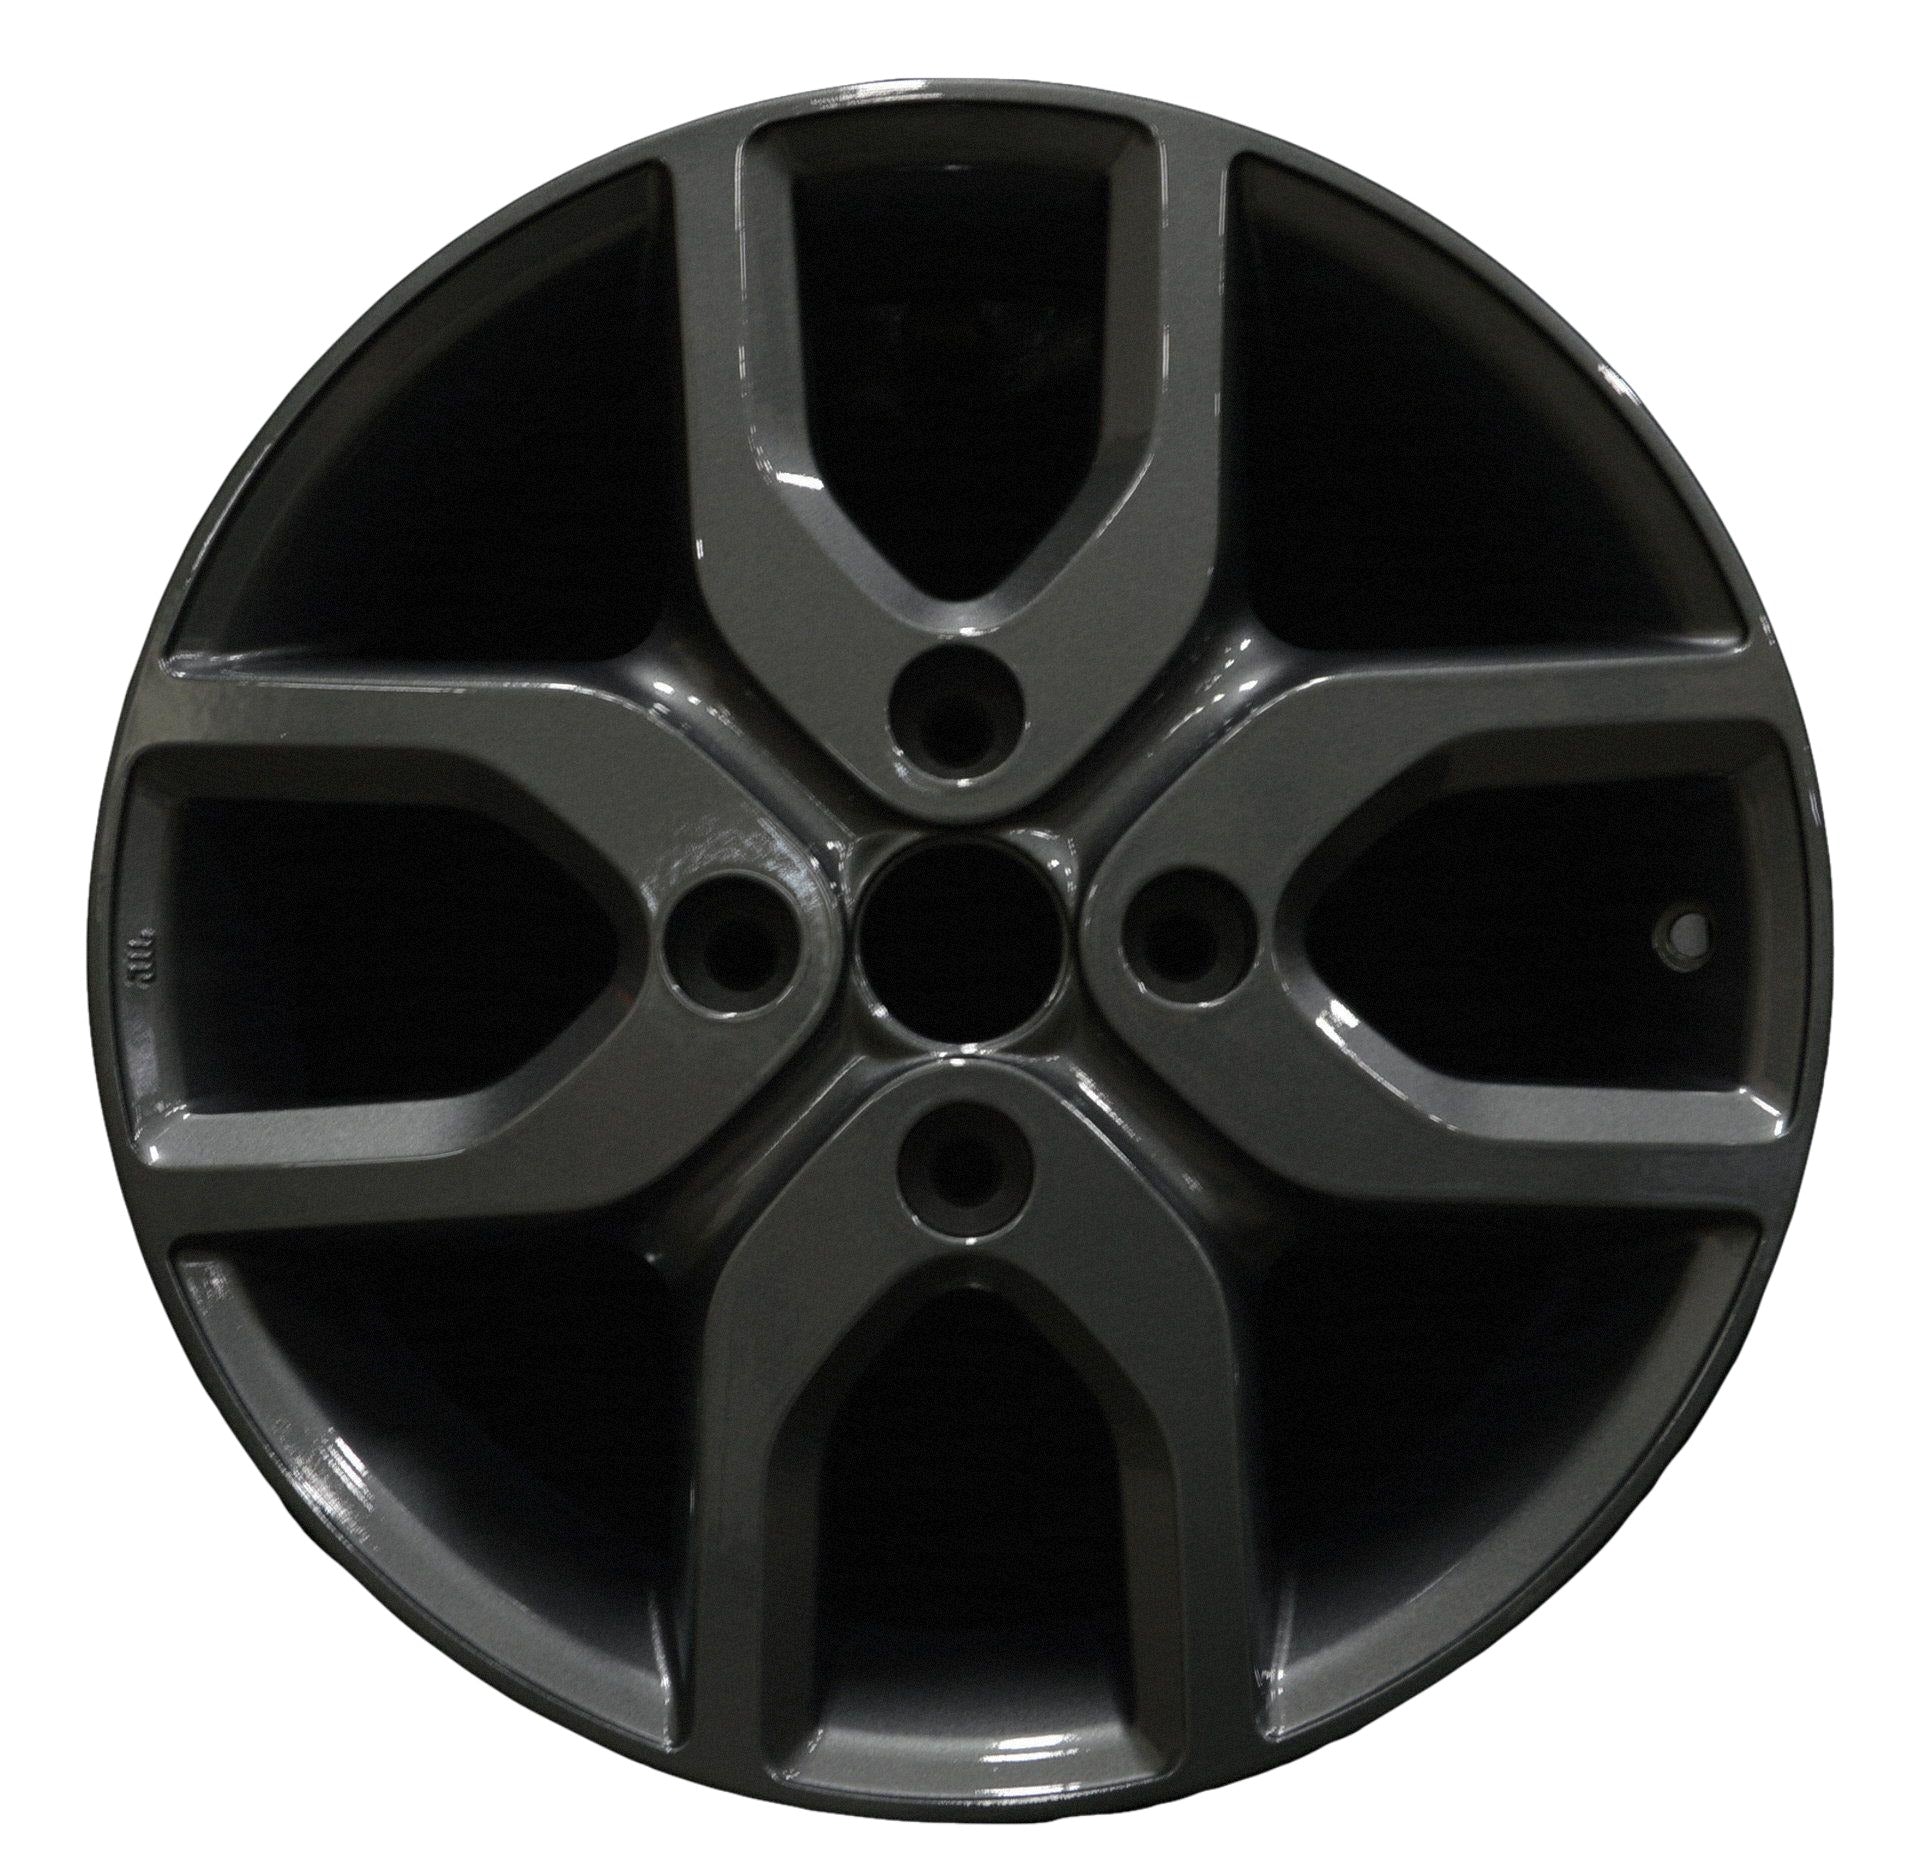 Nissan Cube  2009, 2010, 2011, 2012, 2013, 2014 Factory OEM Car Wheel Size 16x6 Alloy WAO.62536.LC106.FF